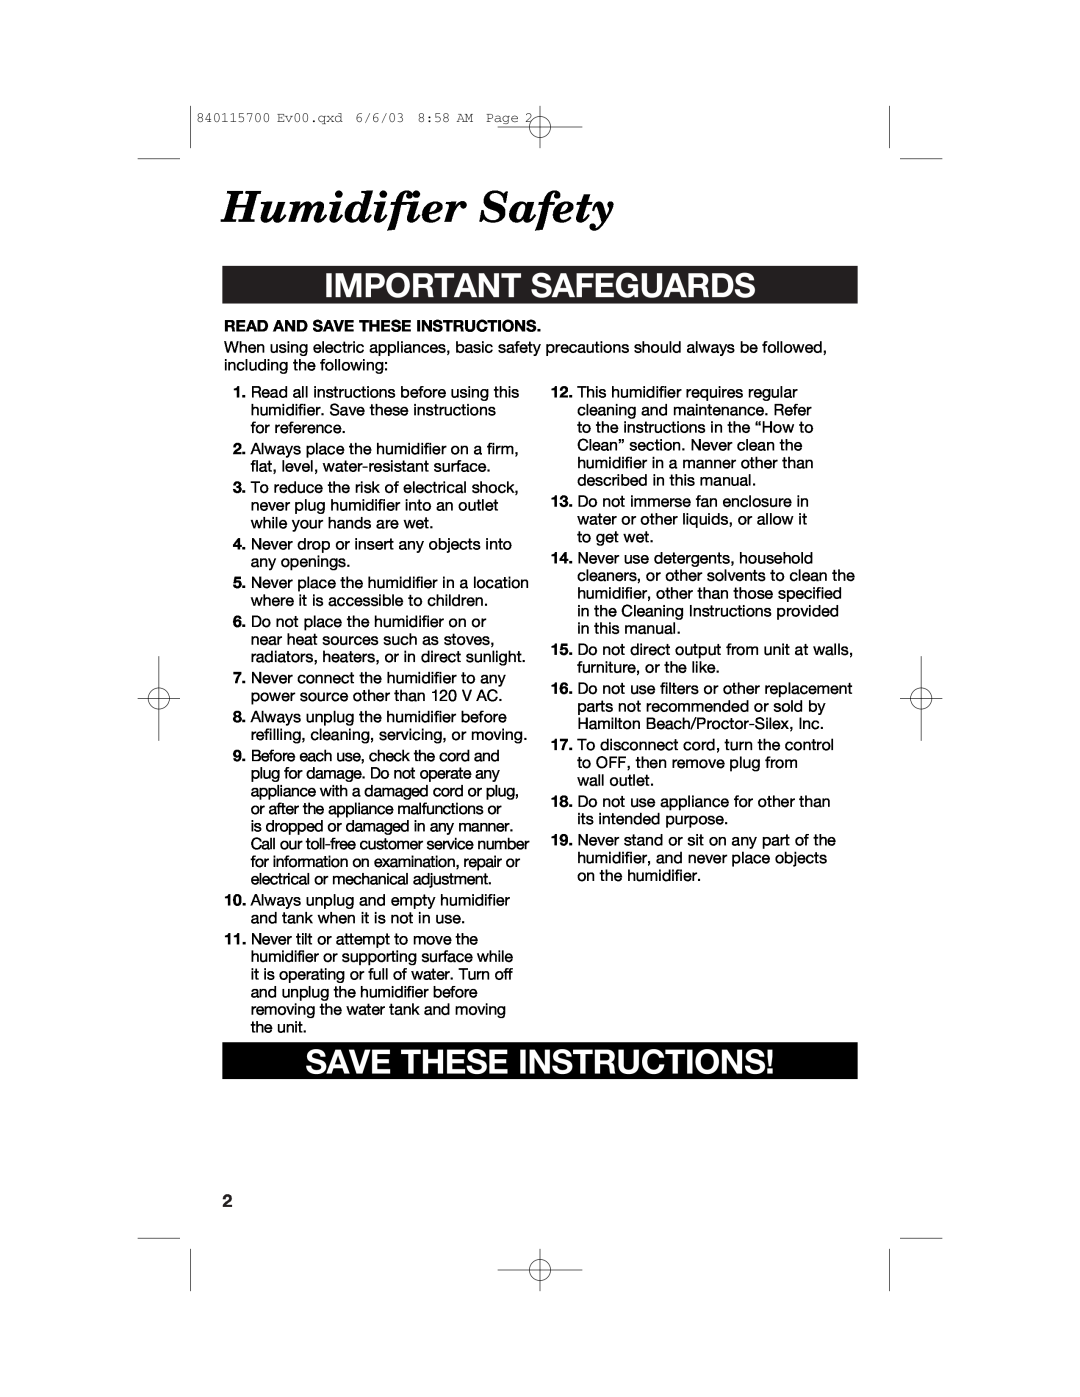 Hamilton Beach 05910, 05520C, 05518C, 05519C Humidifier Safety, Important Safeguards, Read And Save These Instructions 